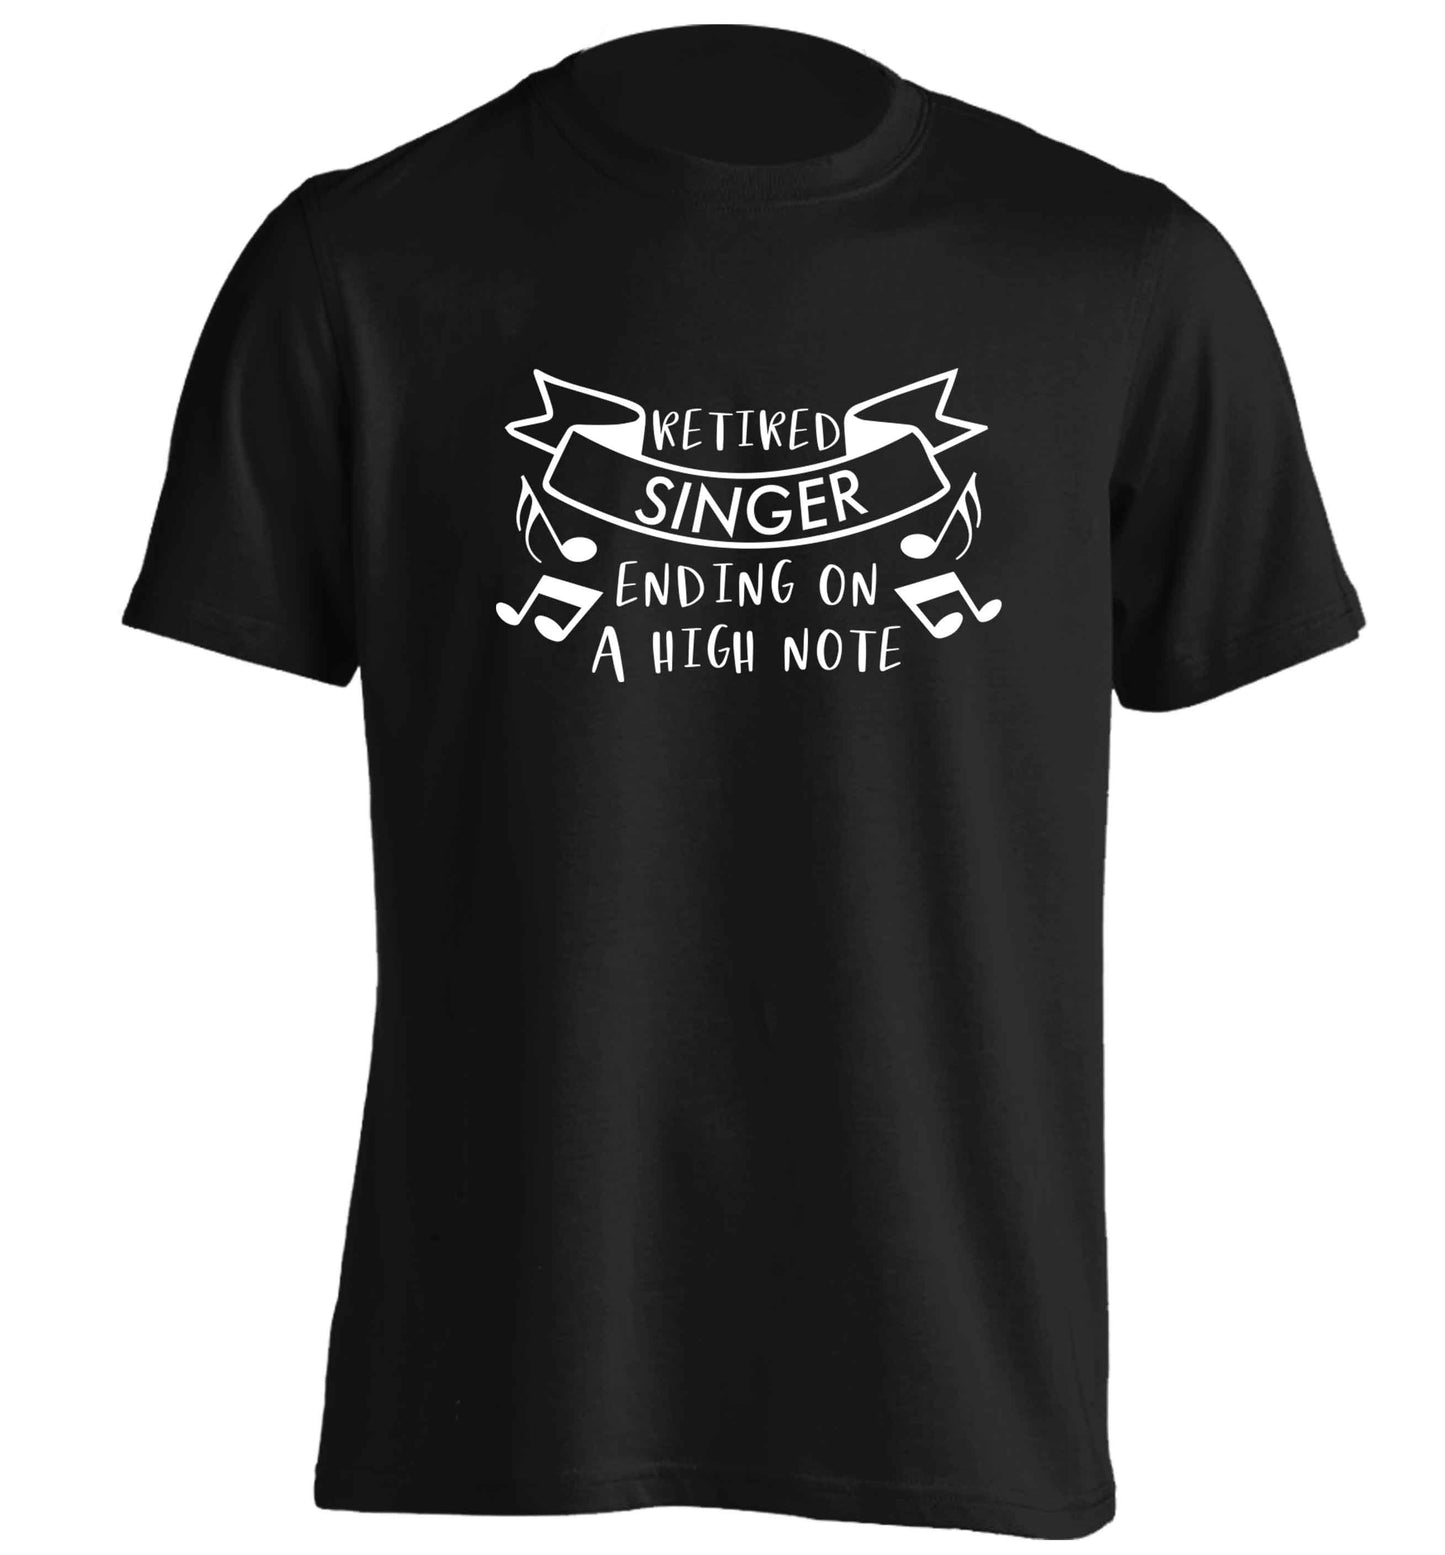 Retired singer ending on a high note adults unisex black Tshirt 2XL